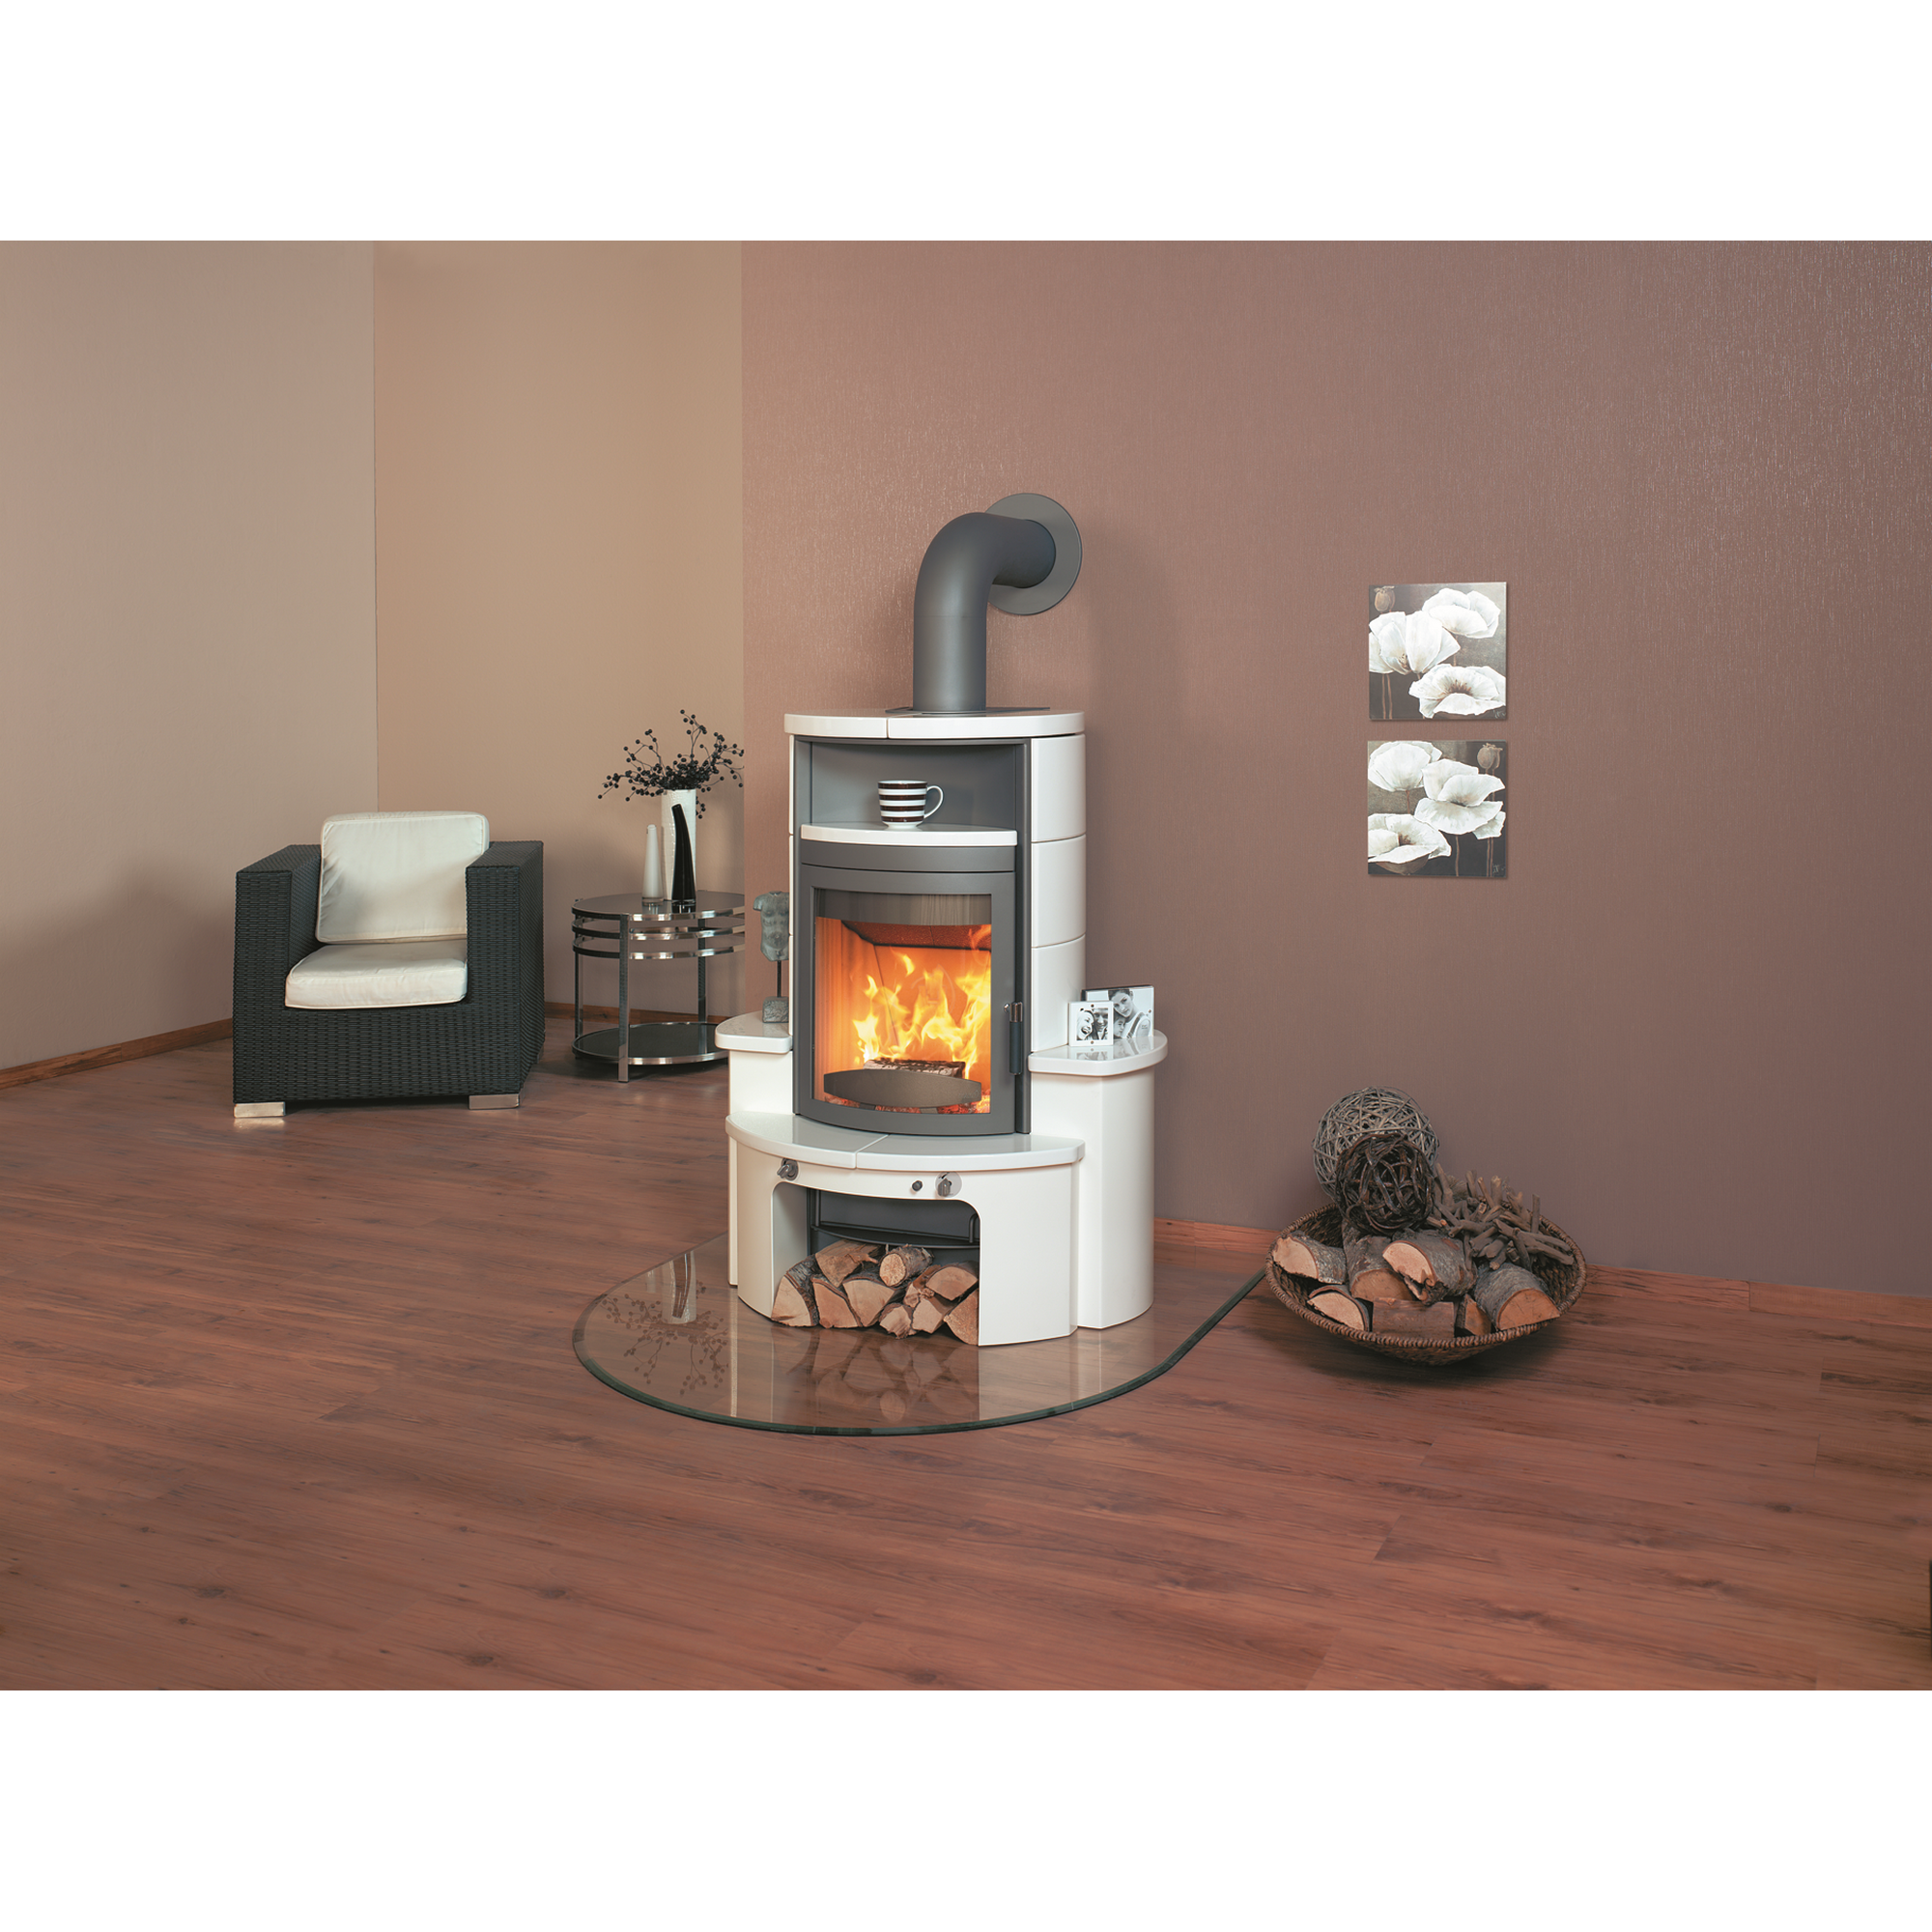 Kaminofen 'Avenso GT ECOplus' titan/creme-weiß 6 kW + product picture